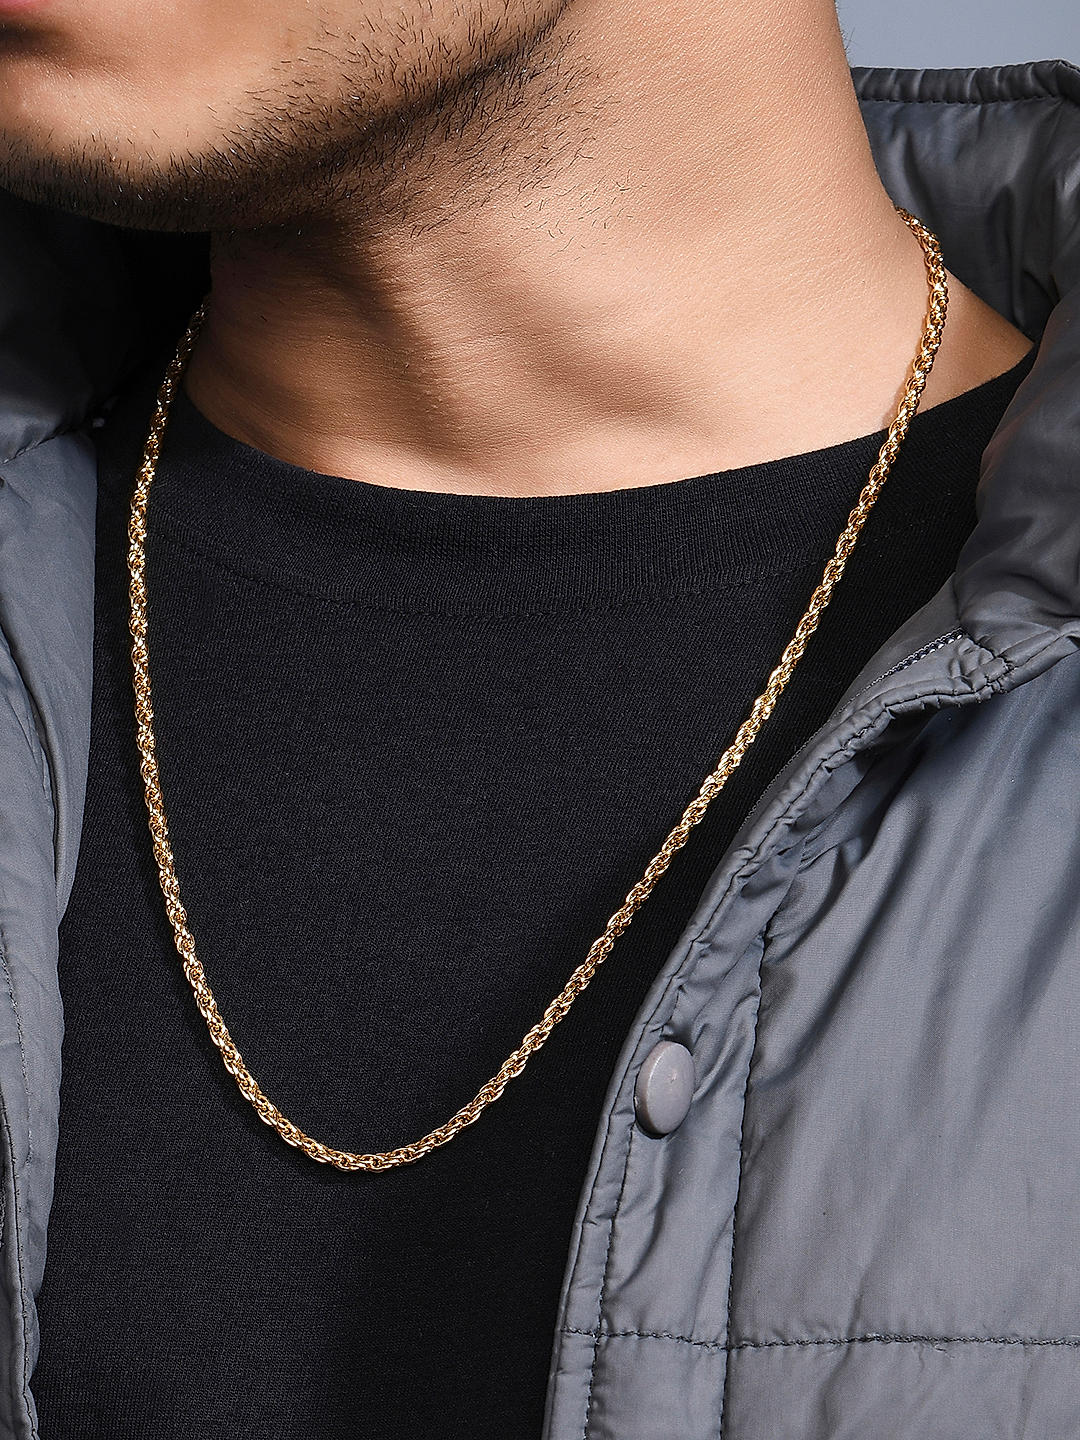 Hip Hop Jewelry 6-12MM 316L Stainless Steel 18K Real Gold Plated Bracelet Necklace  Mens Miami Curb Cuban Link Chain For Men - AliExpress